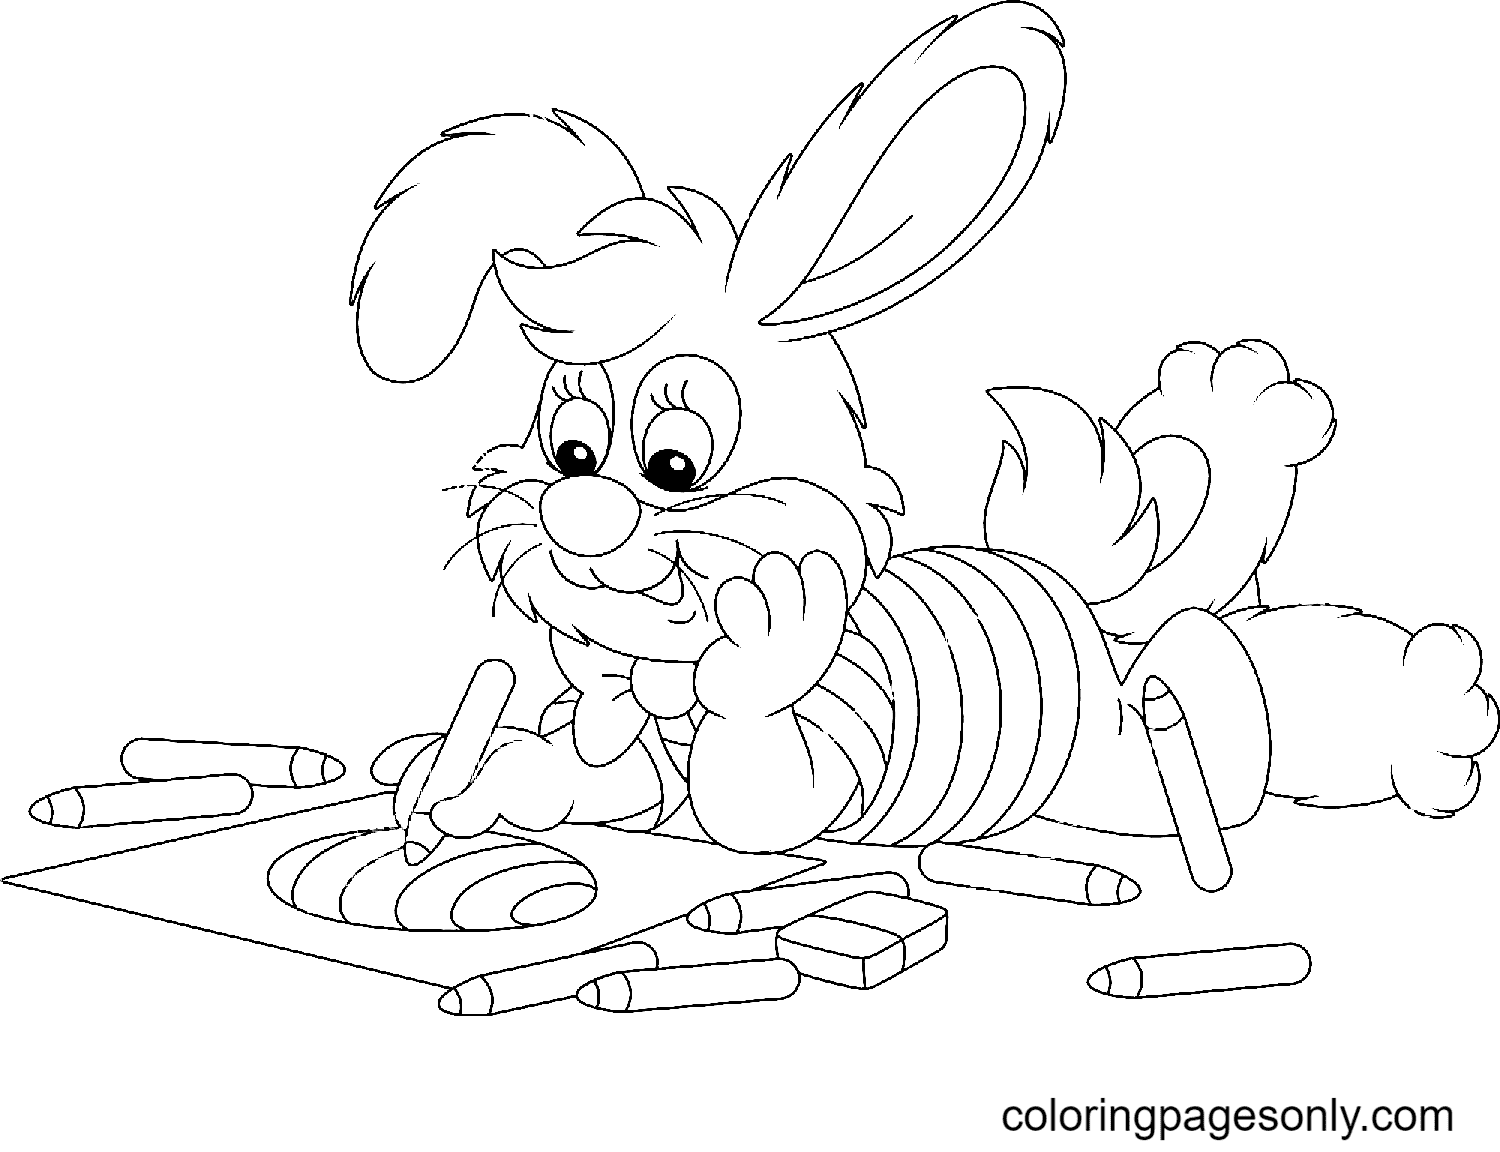 Easter Bunny Smiling And Drawing An Egg With Crayons Coloring Pages